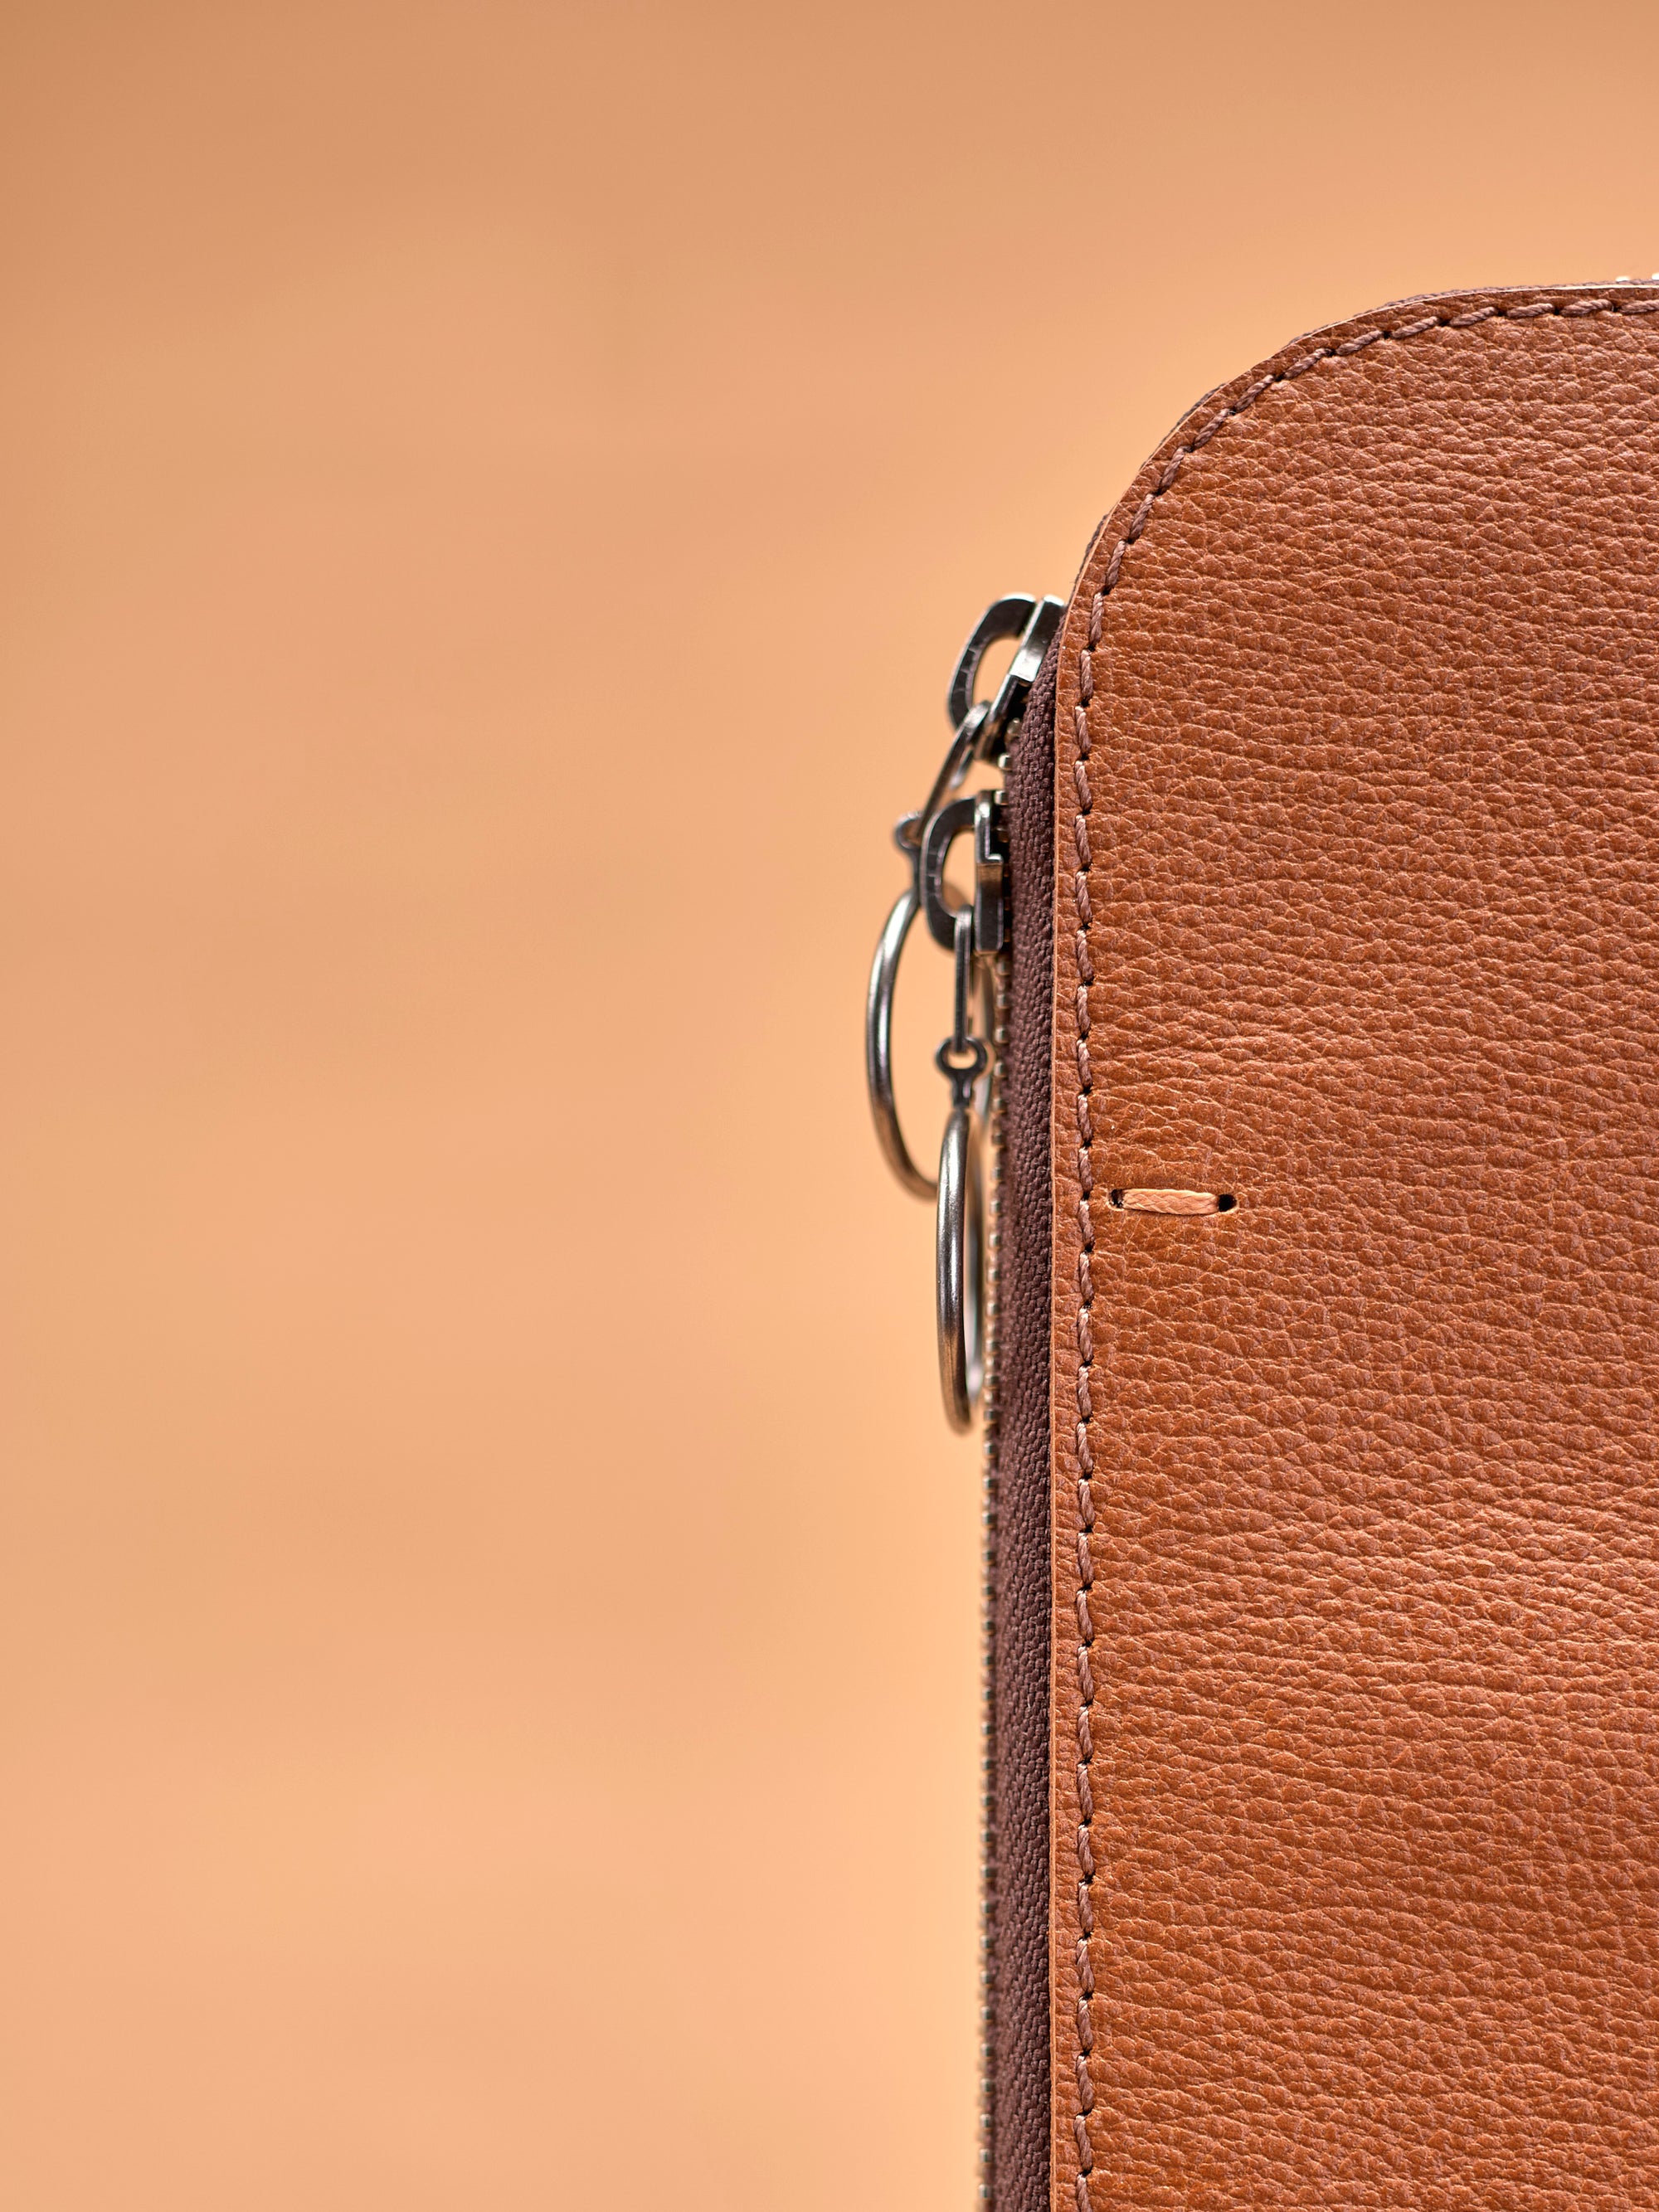 Hand stitched detail. Draftsman 6 iPad Case Tan, iPad Pro 11-inch, iPad Pro 12.9-inch, M1 Chip by Capra Leather